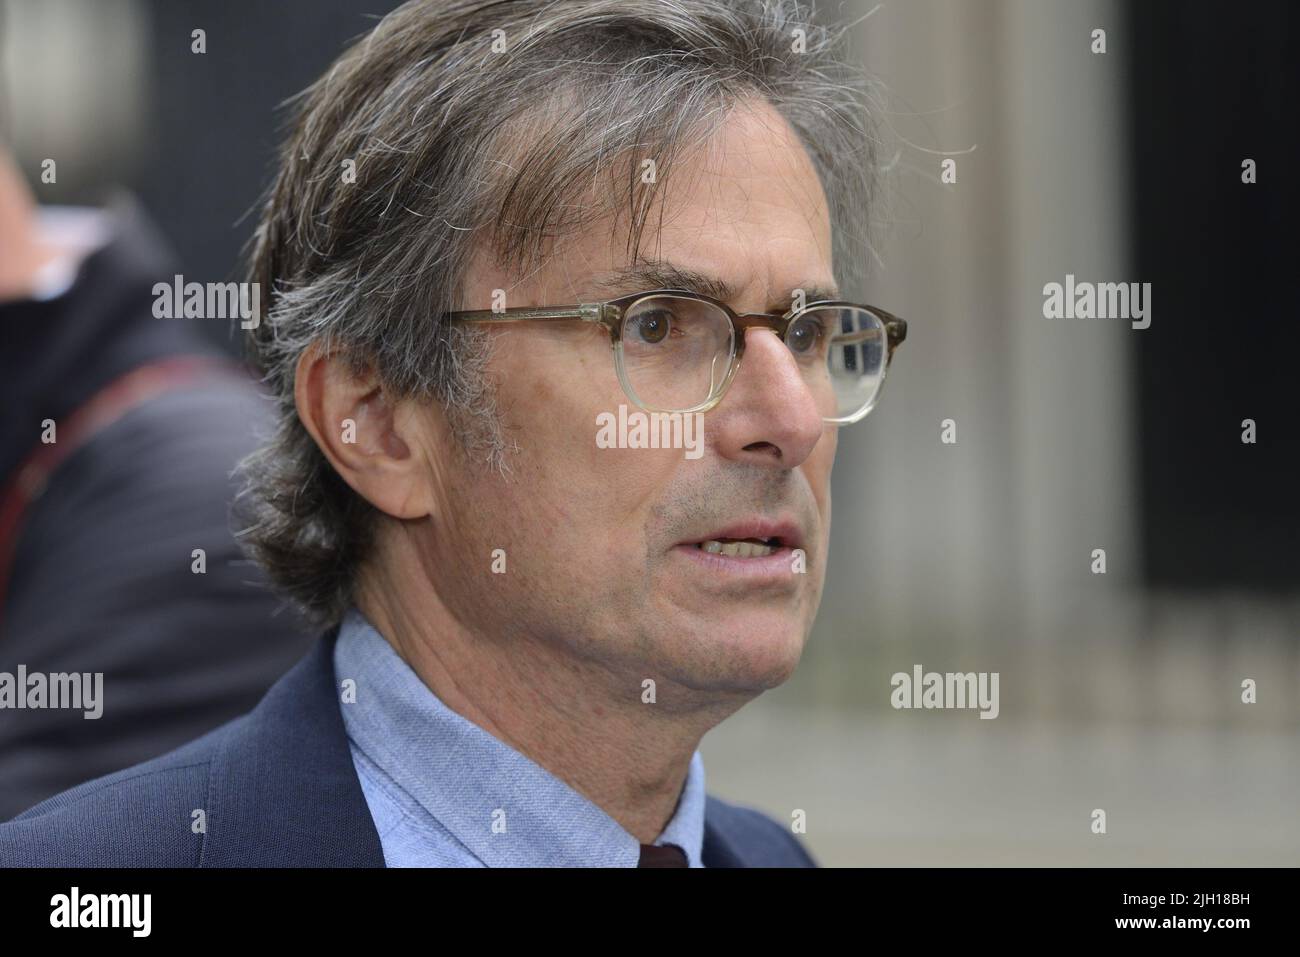 Robert Peston - Political Editor of ITV News - in Downing Street on the day Prime Johnson resigned as Prime Minister - July 7th 2022 Stock Photo